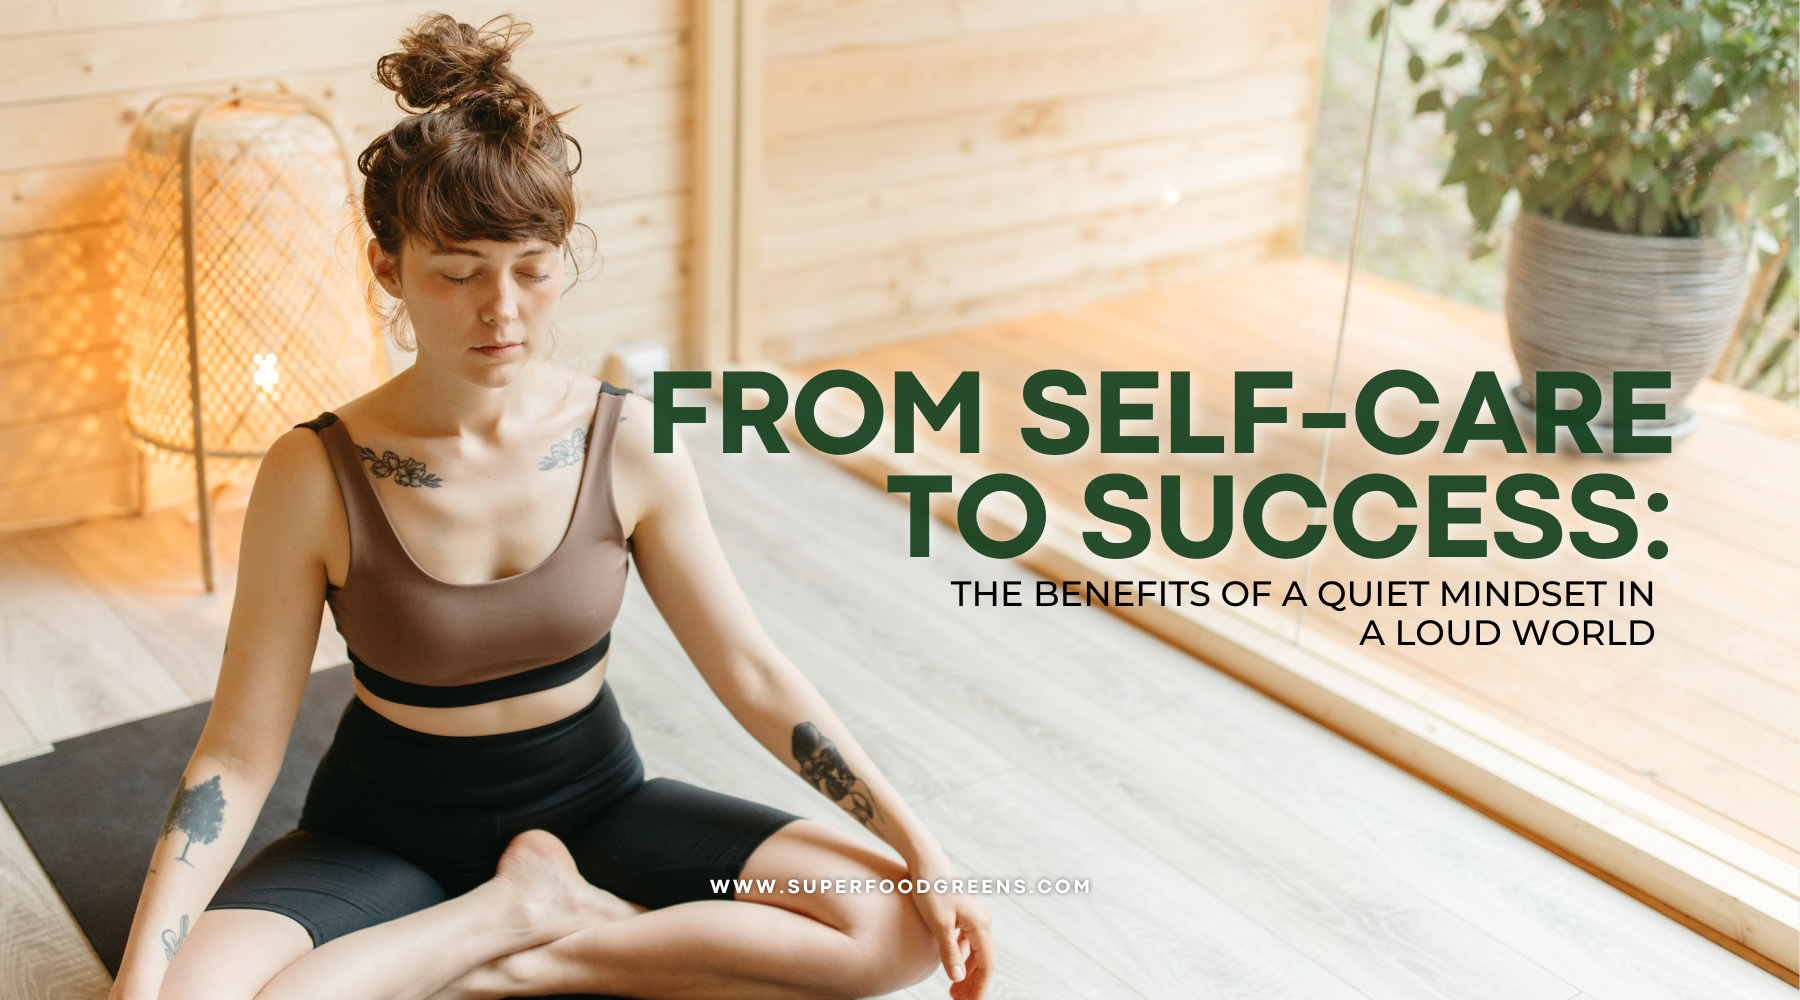 From Self-Care to Success: The Benefits of a Quiet Mindset in a Loud World | Superfood Greens